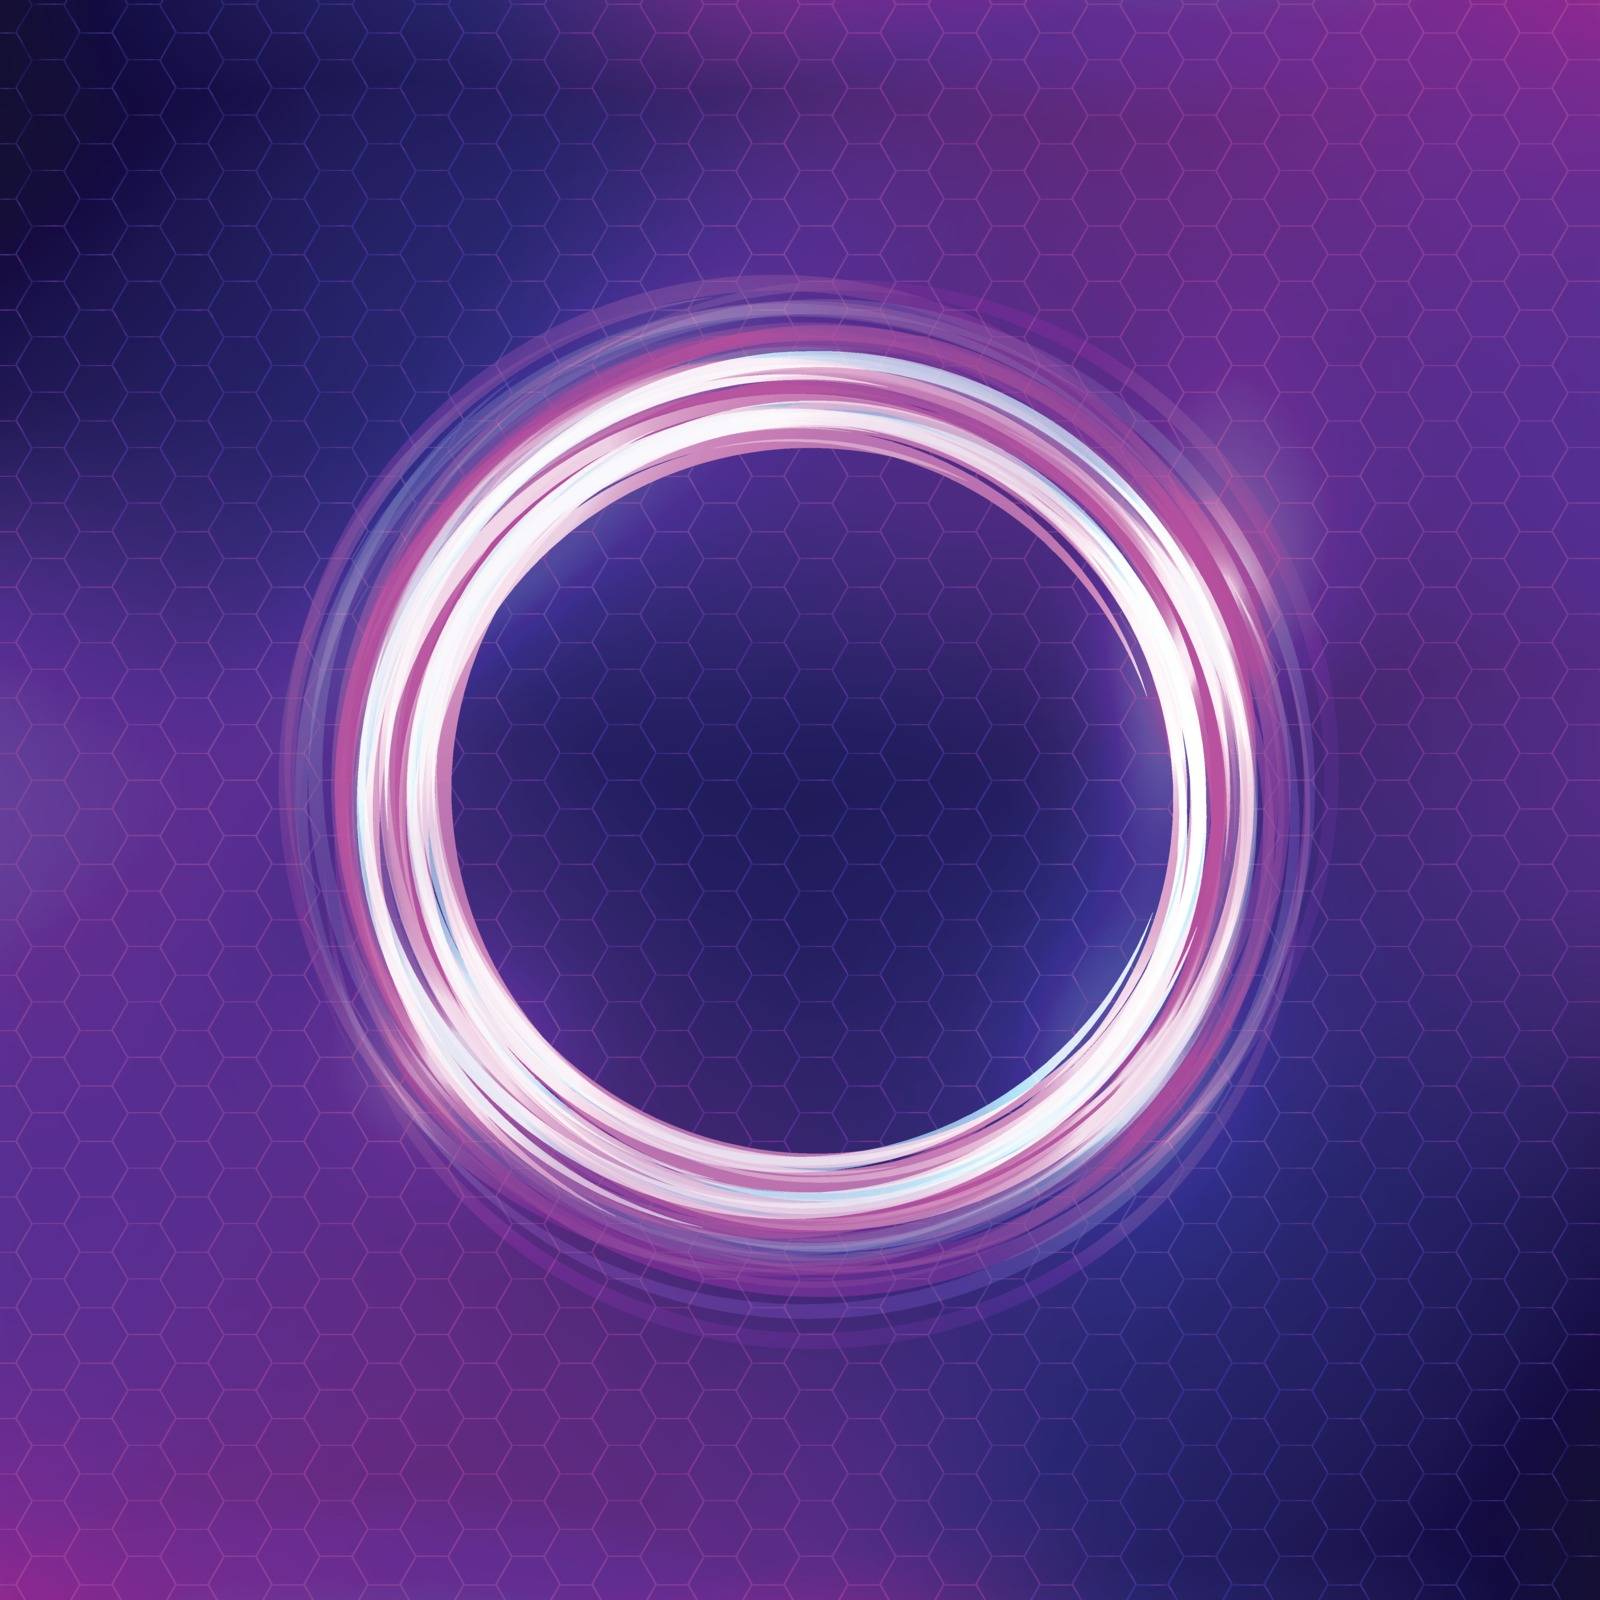 Abstract purple background with illuminated circle by GraffiTimi